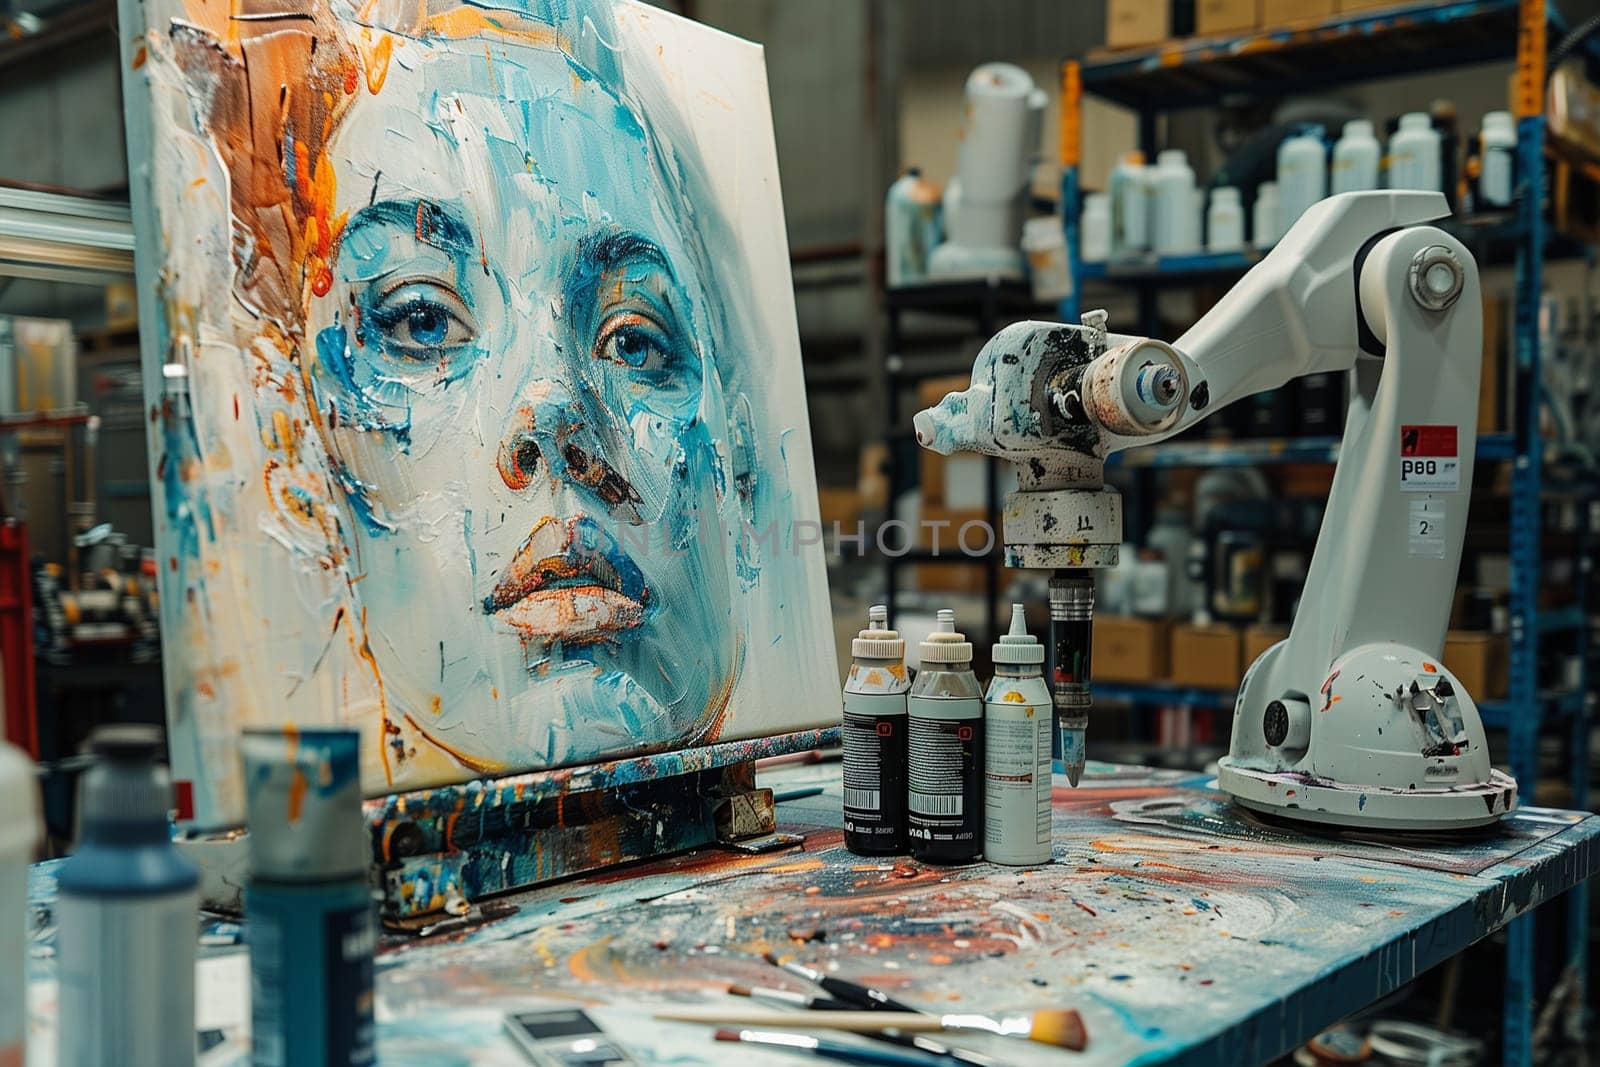 Robotic Arm Painting a Modern Portrait in an Artistic Workshop by Sd28DimoN_1976